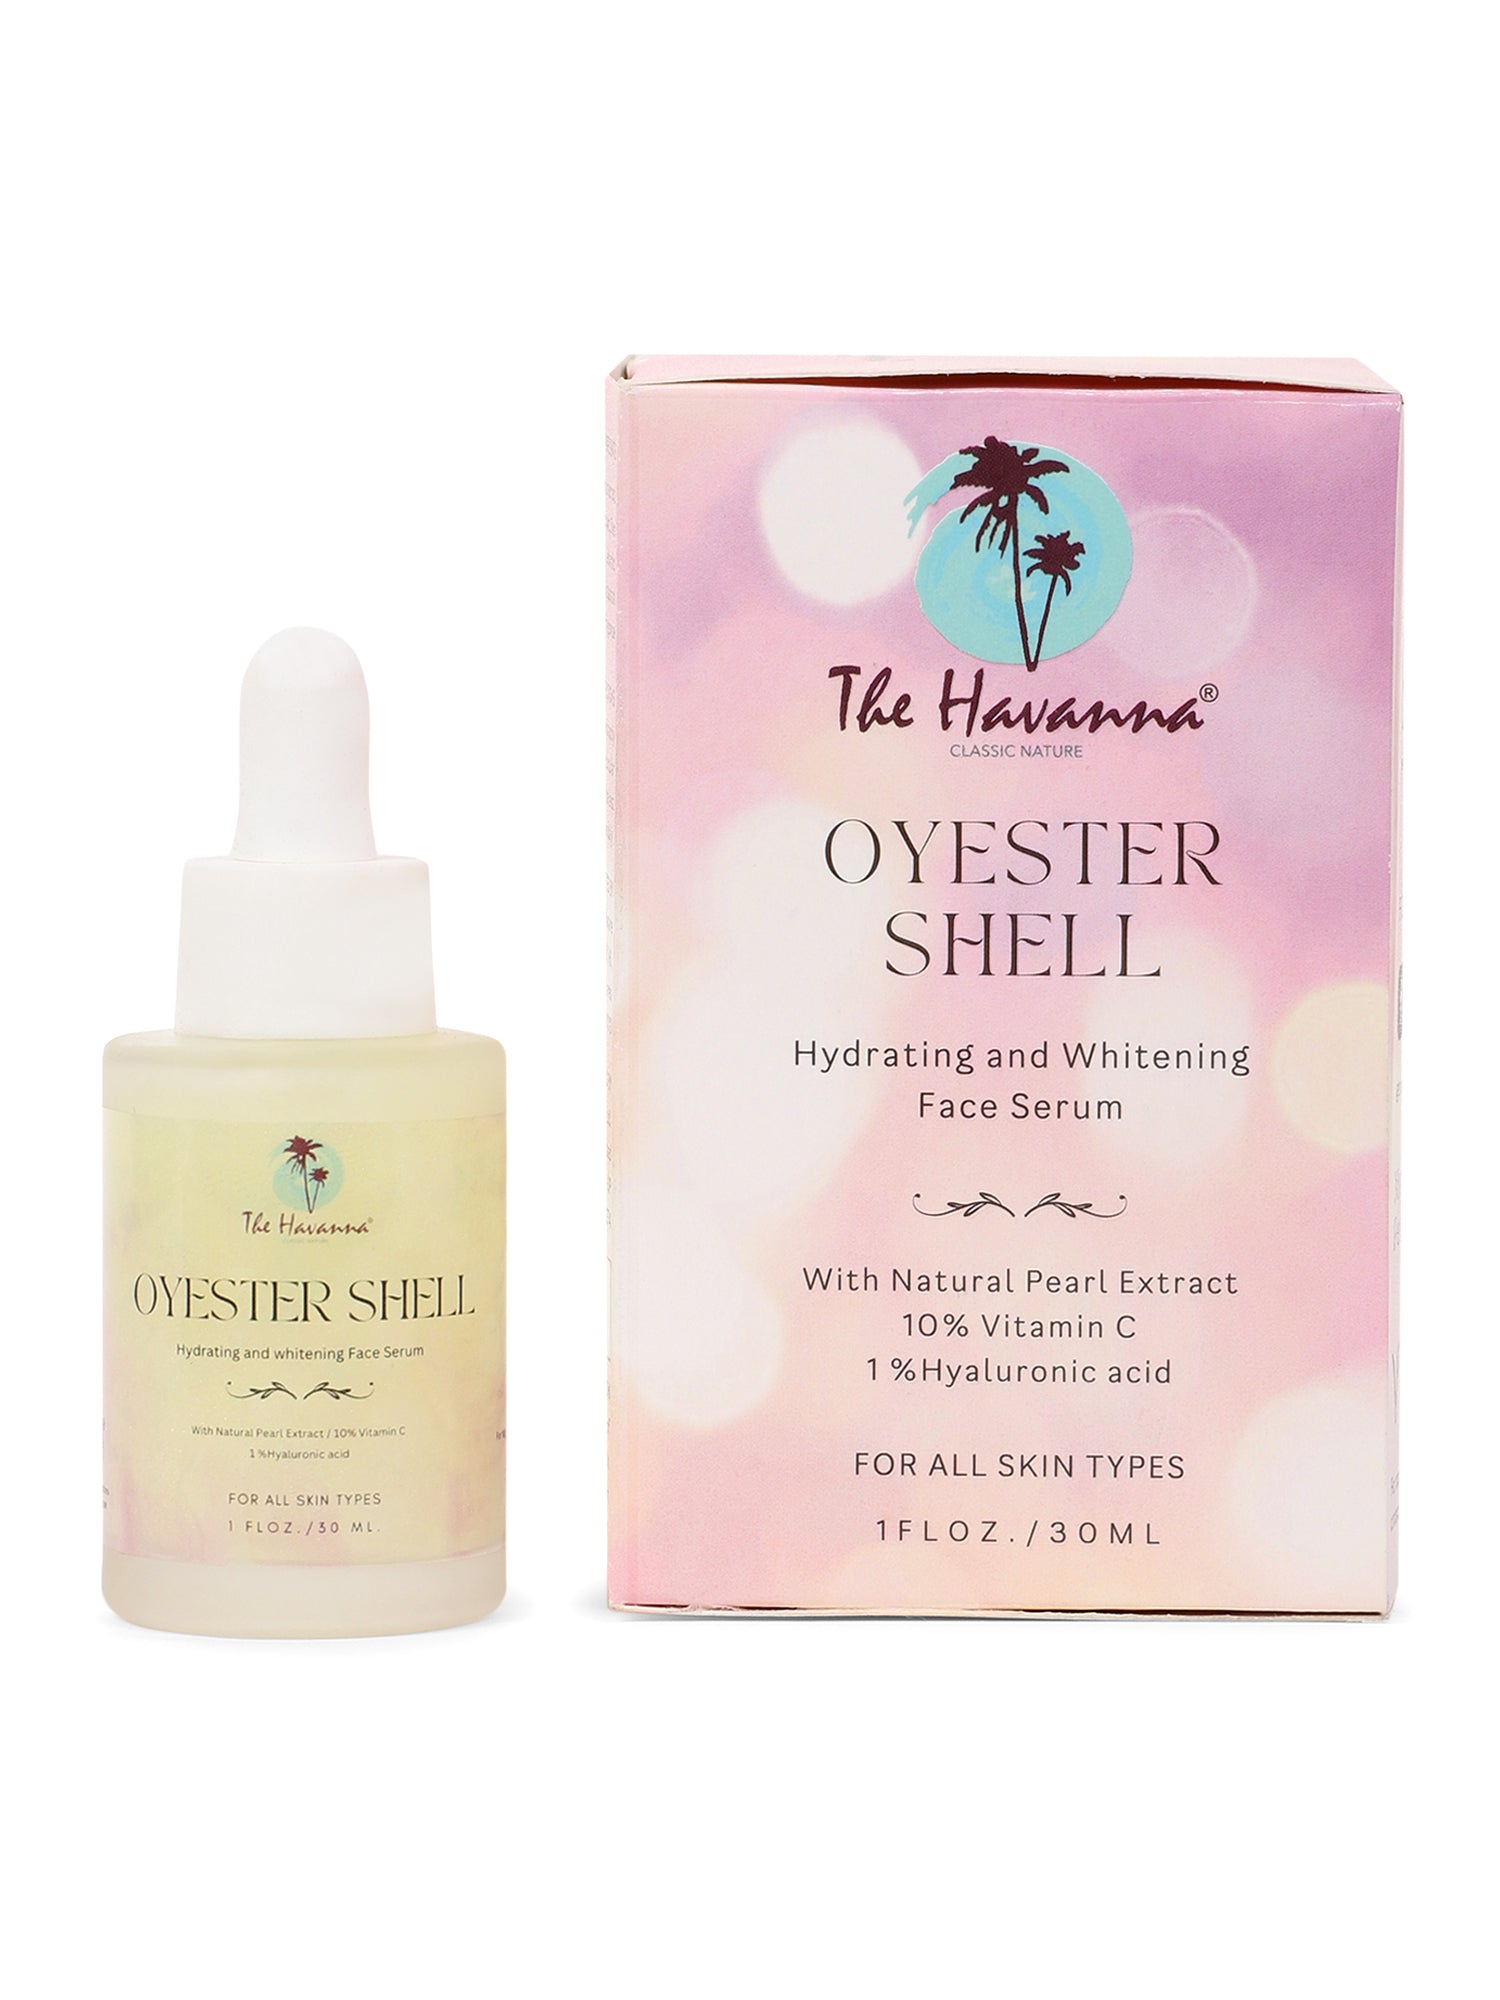 Hydrating and Whitening Oyster Shell Face Serum- The Havanna Classic Nature